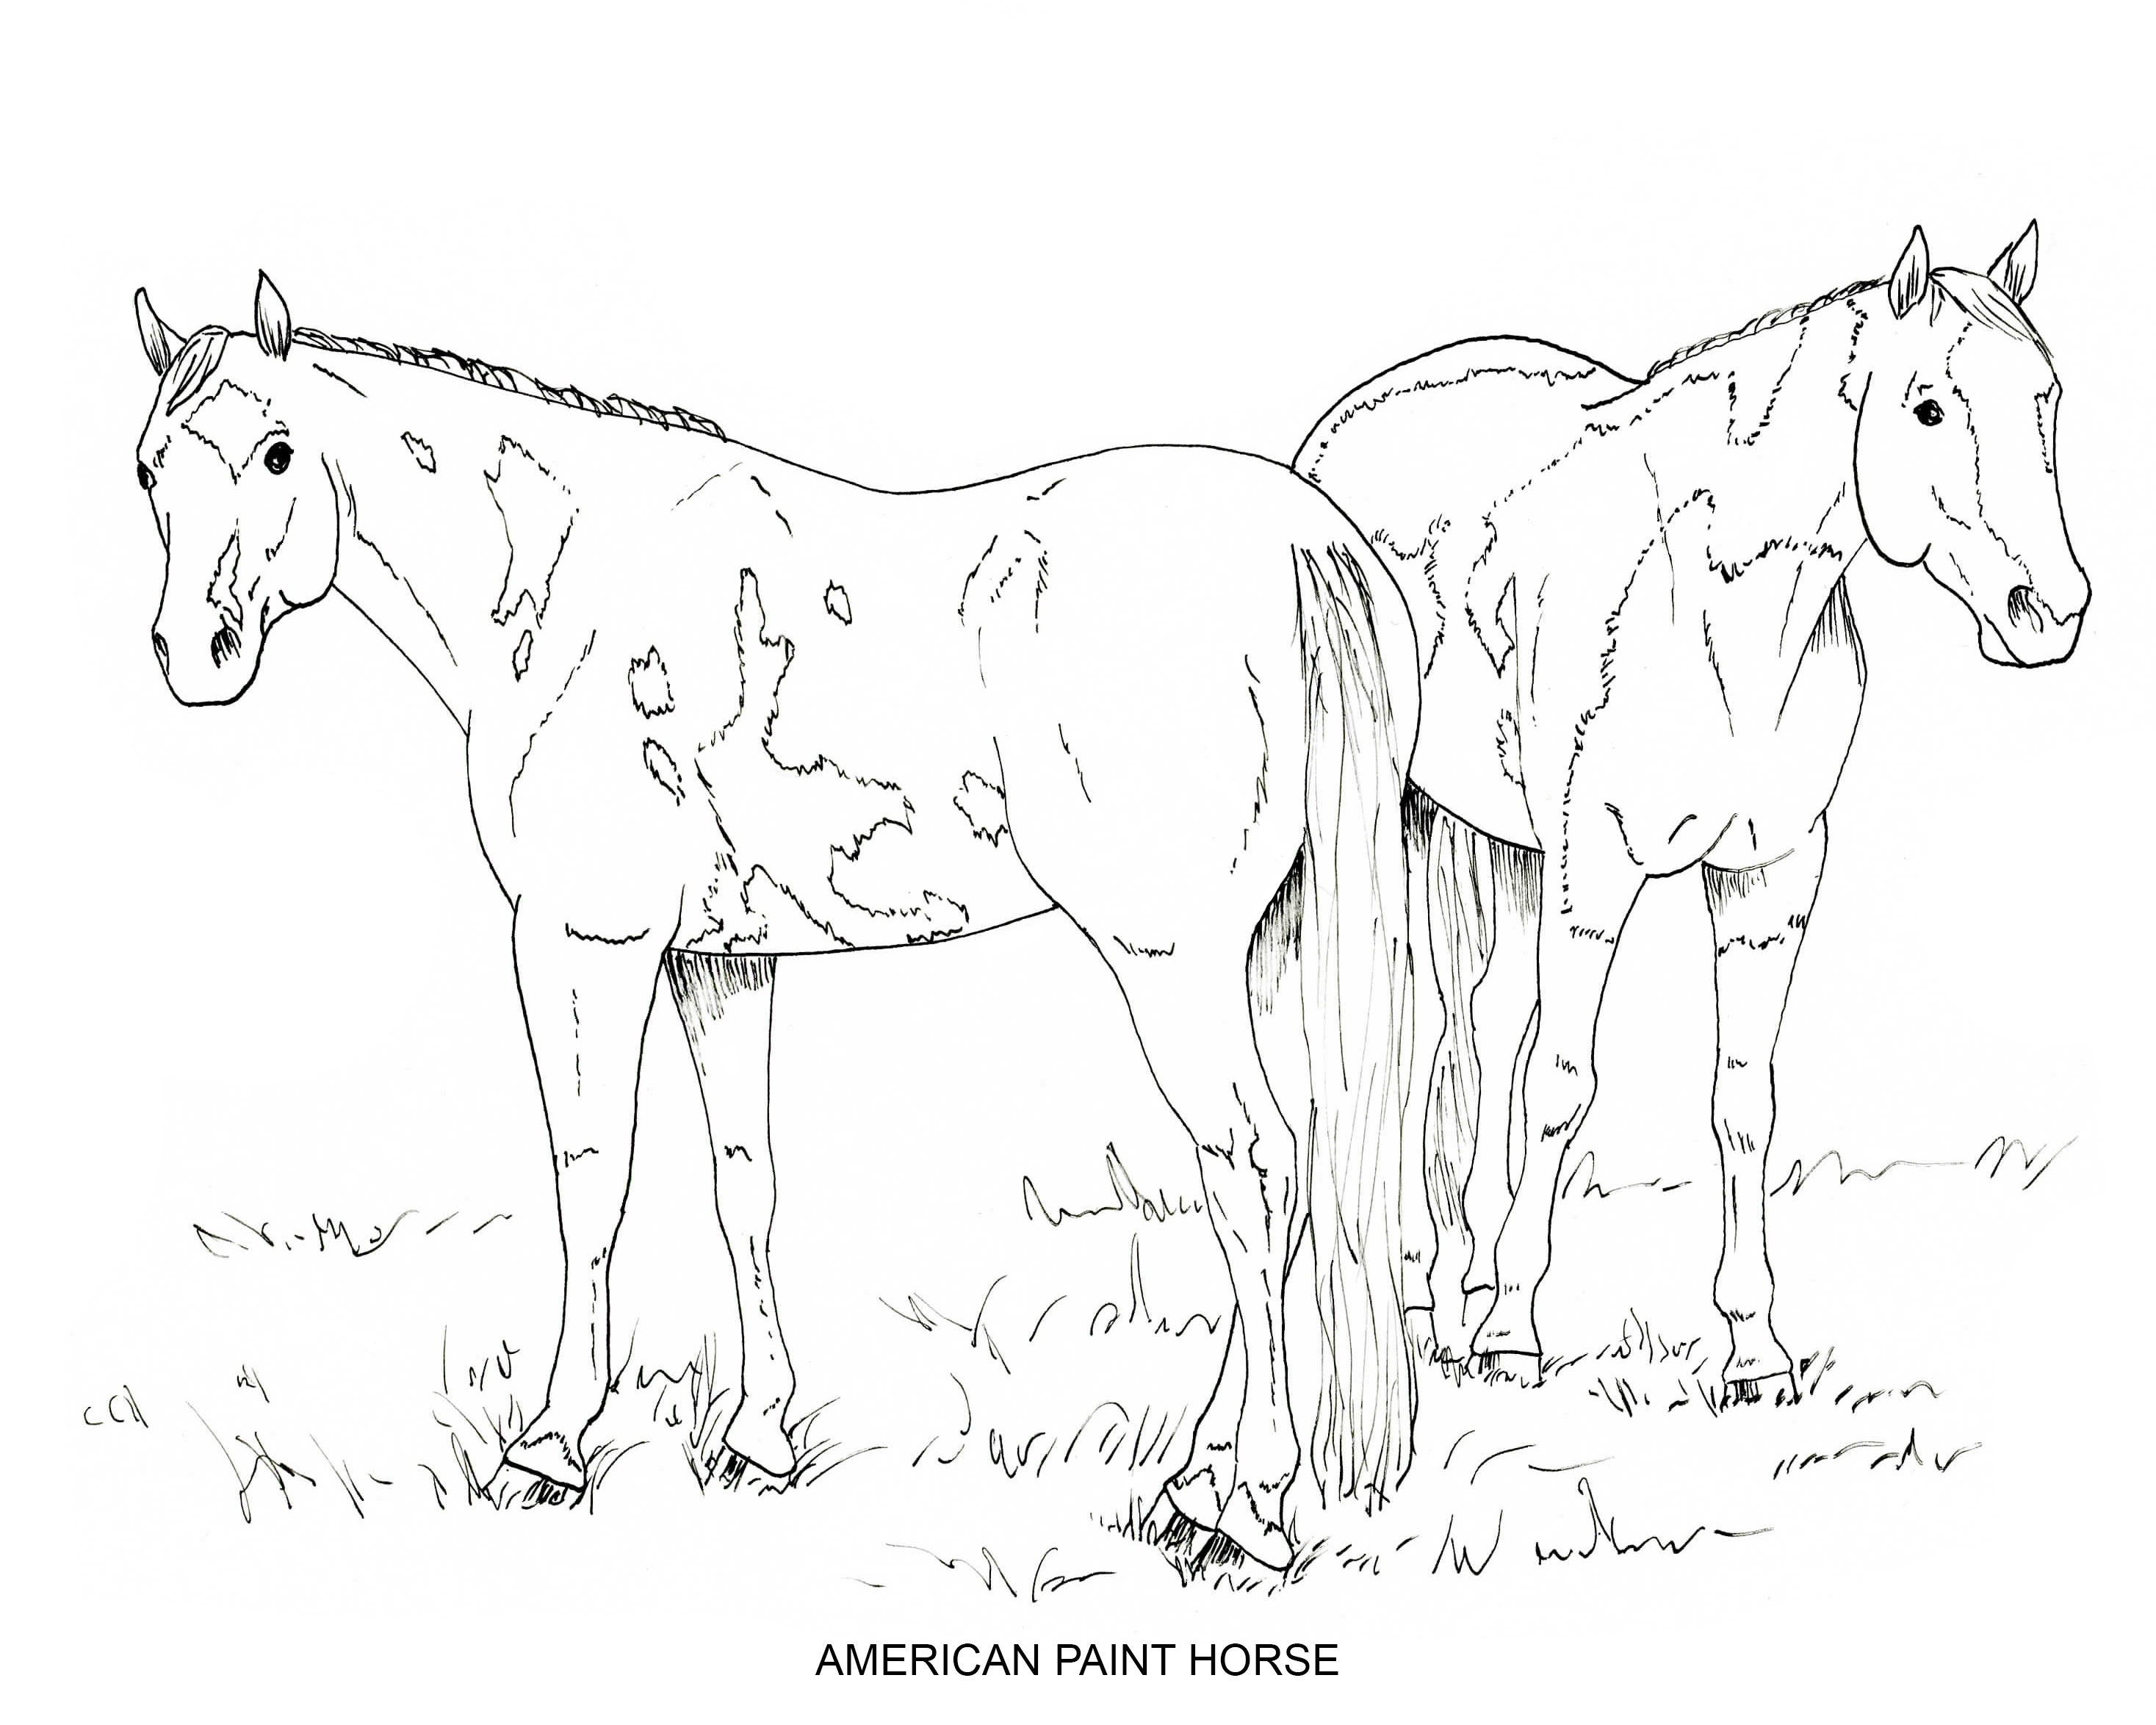 PRINTABLE set of 10 Horse Breed coloring pages 2 Digital -  Portugal